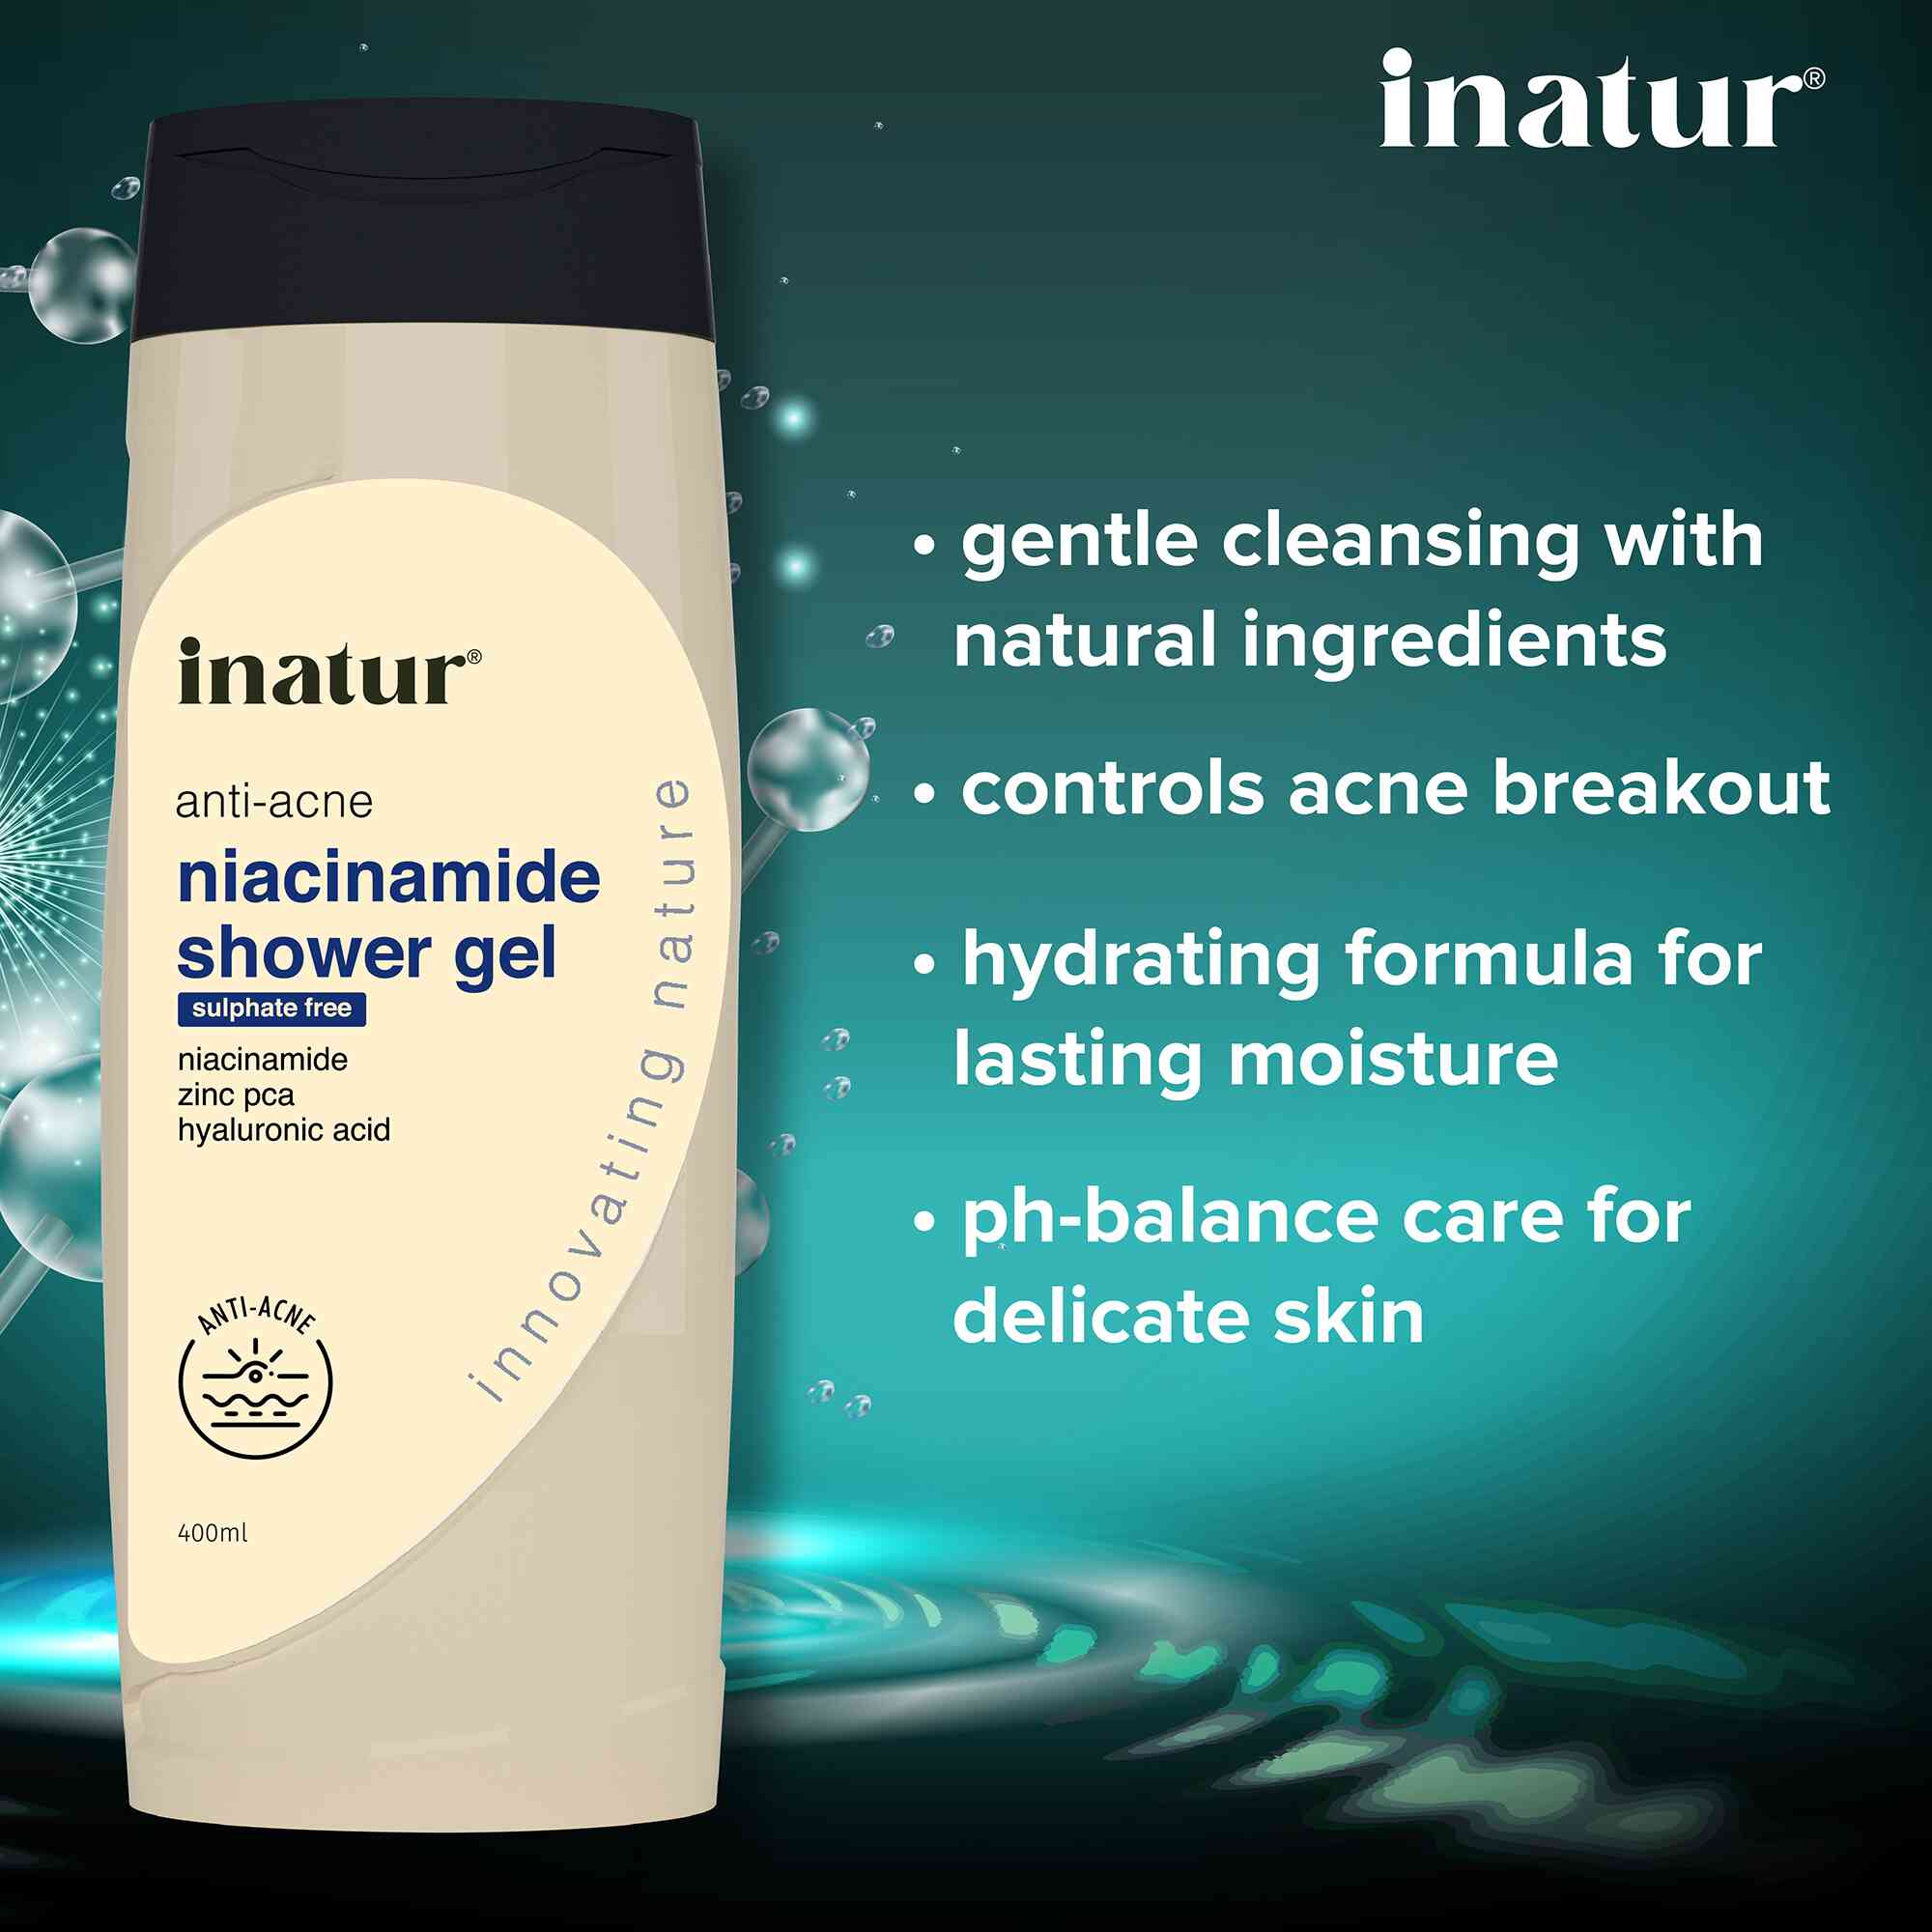 why inatur niacinamide shower gel